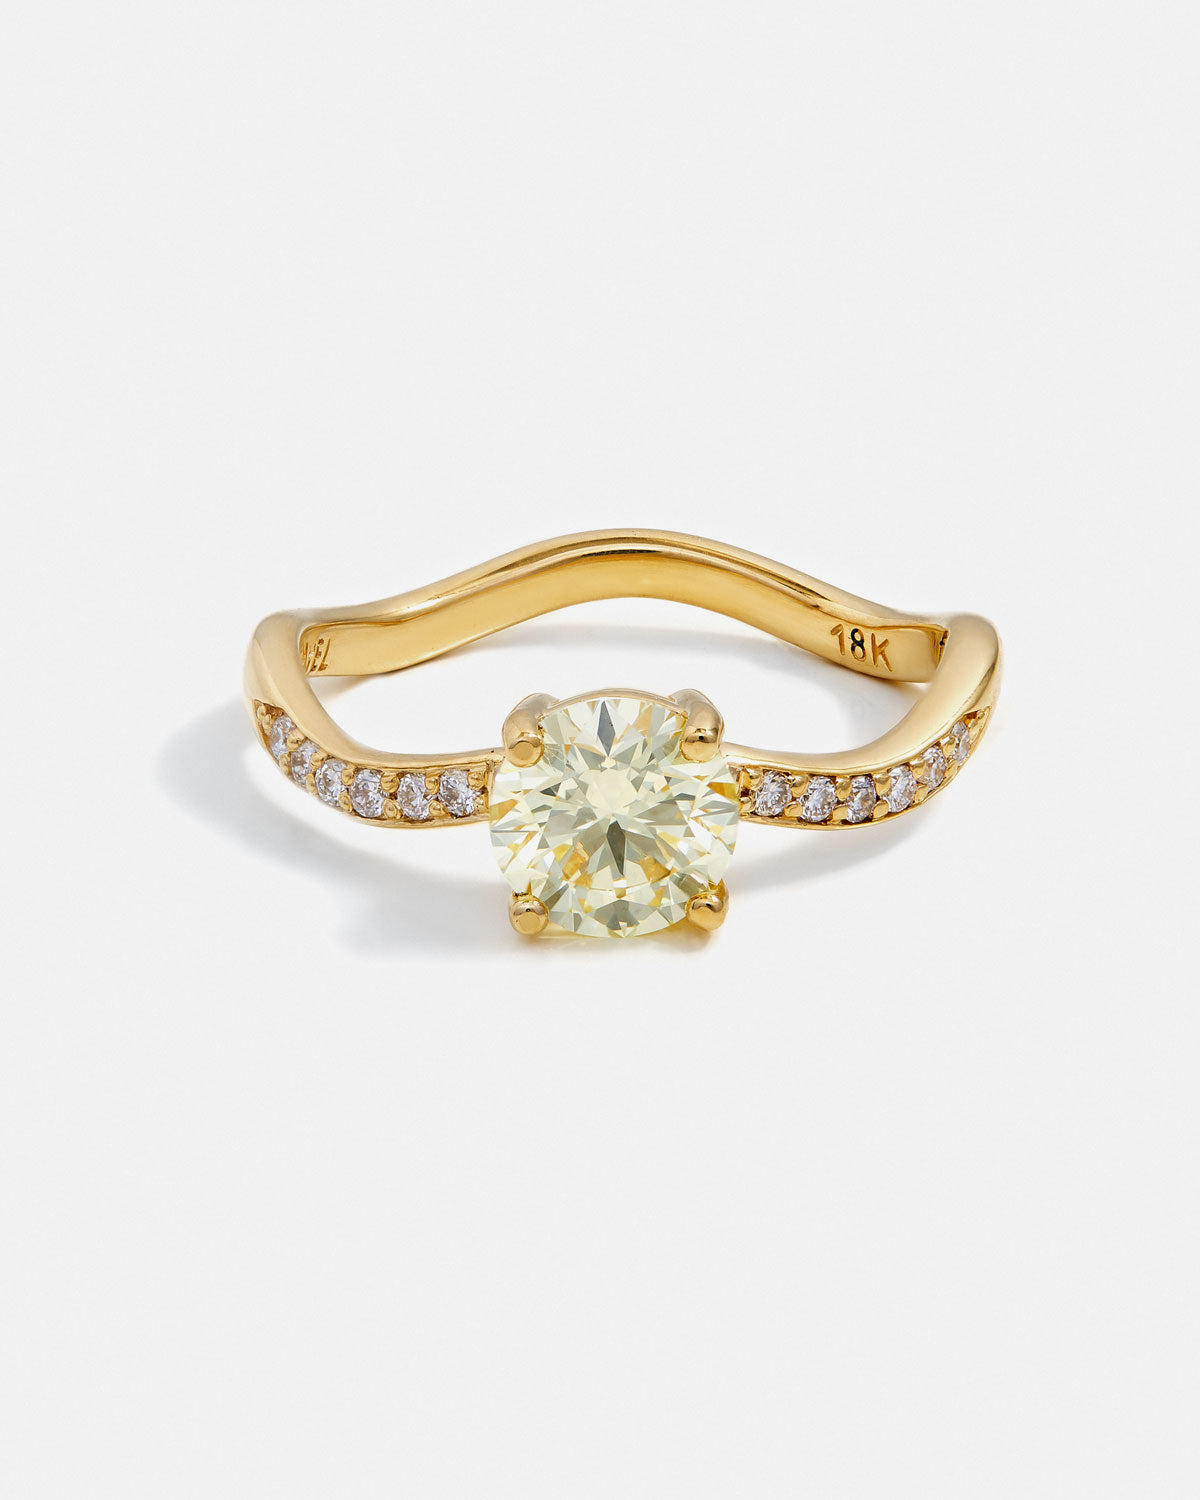 Disco Pavée Ring in 18k Fairmined Yellow Gold with 1.07 carat Yellow lab-grown Diamond